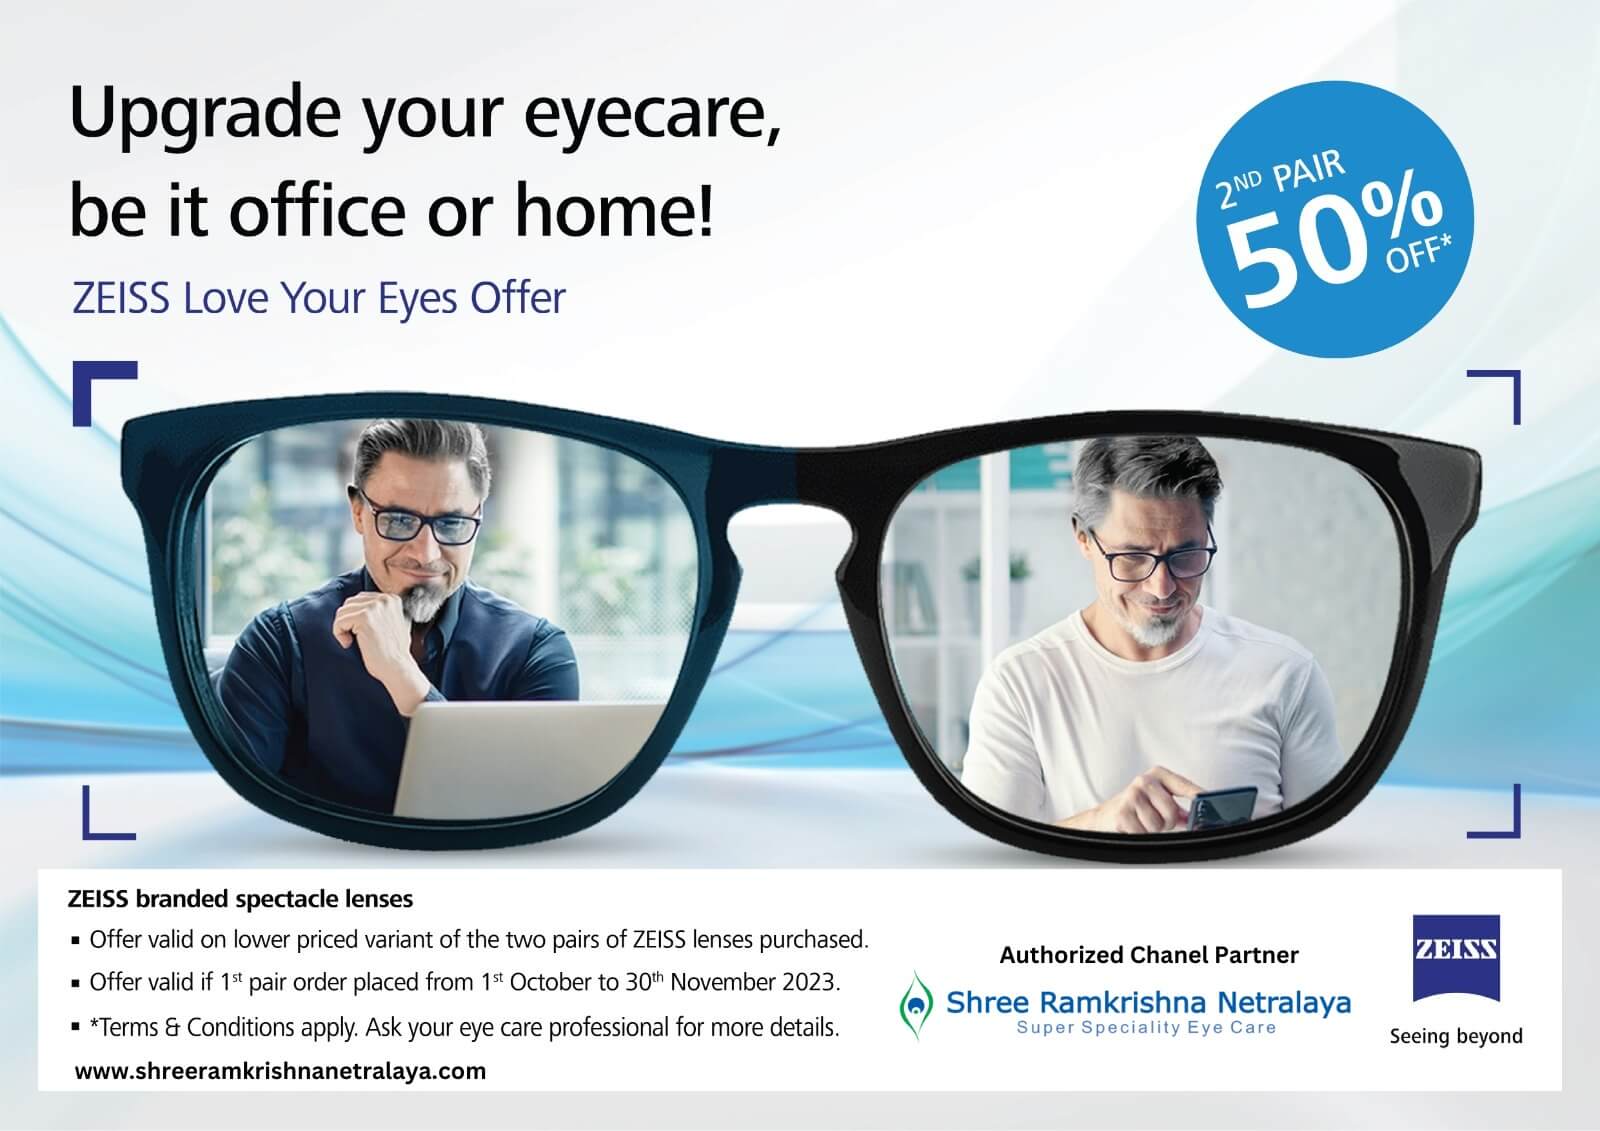 zeiss  branded spectacle lenses advertisement-2